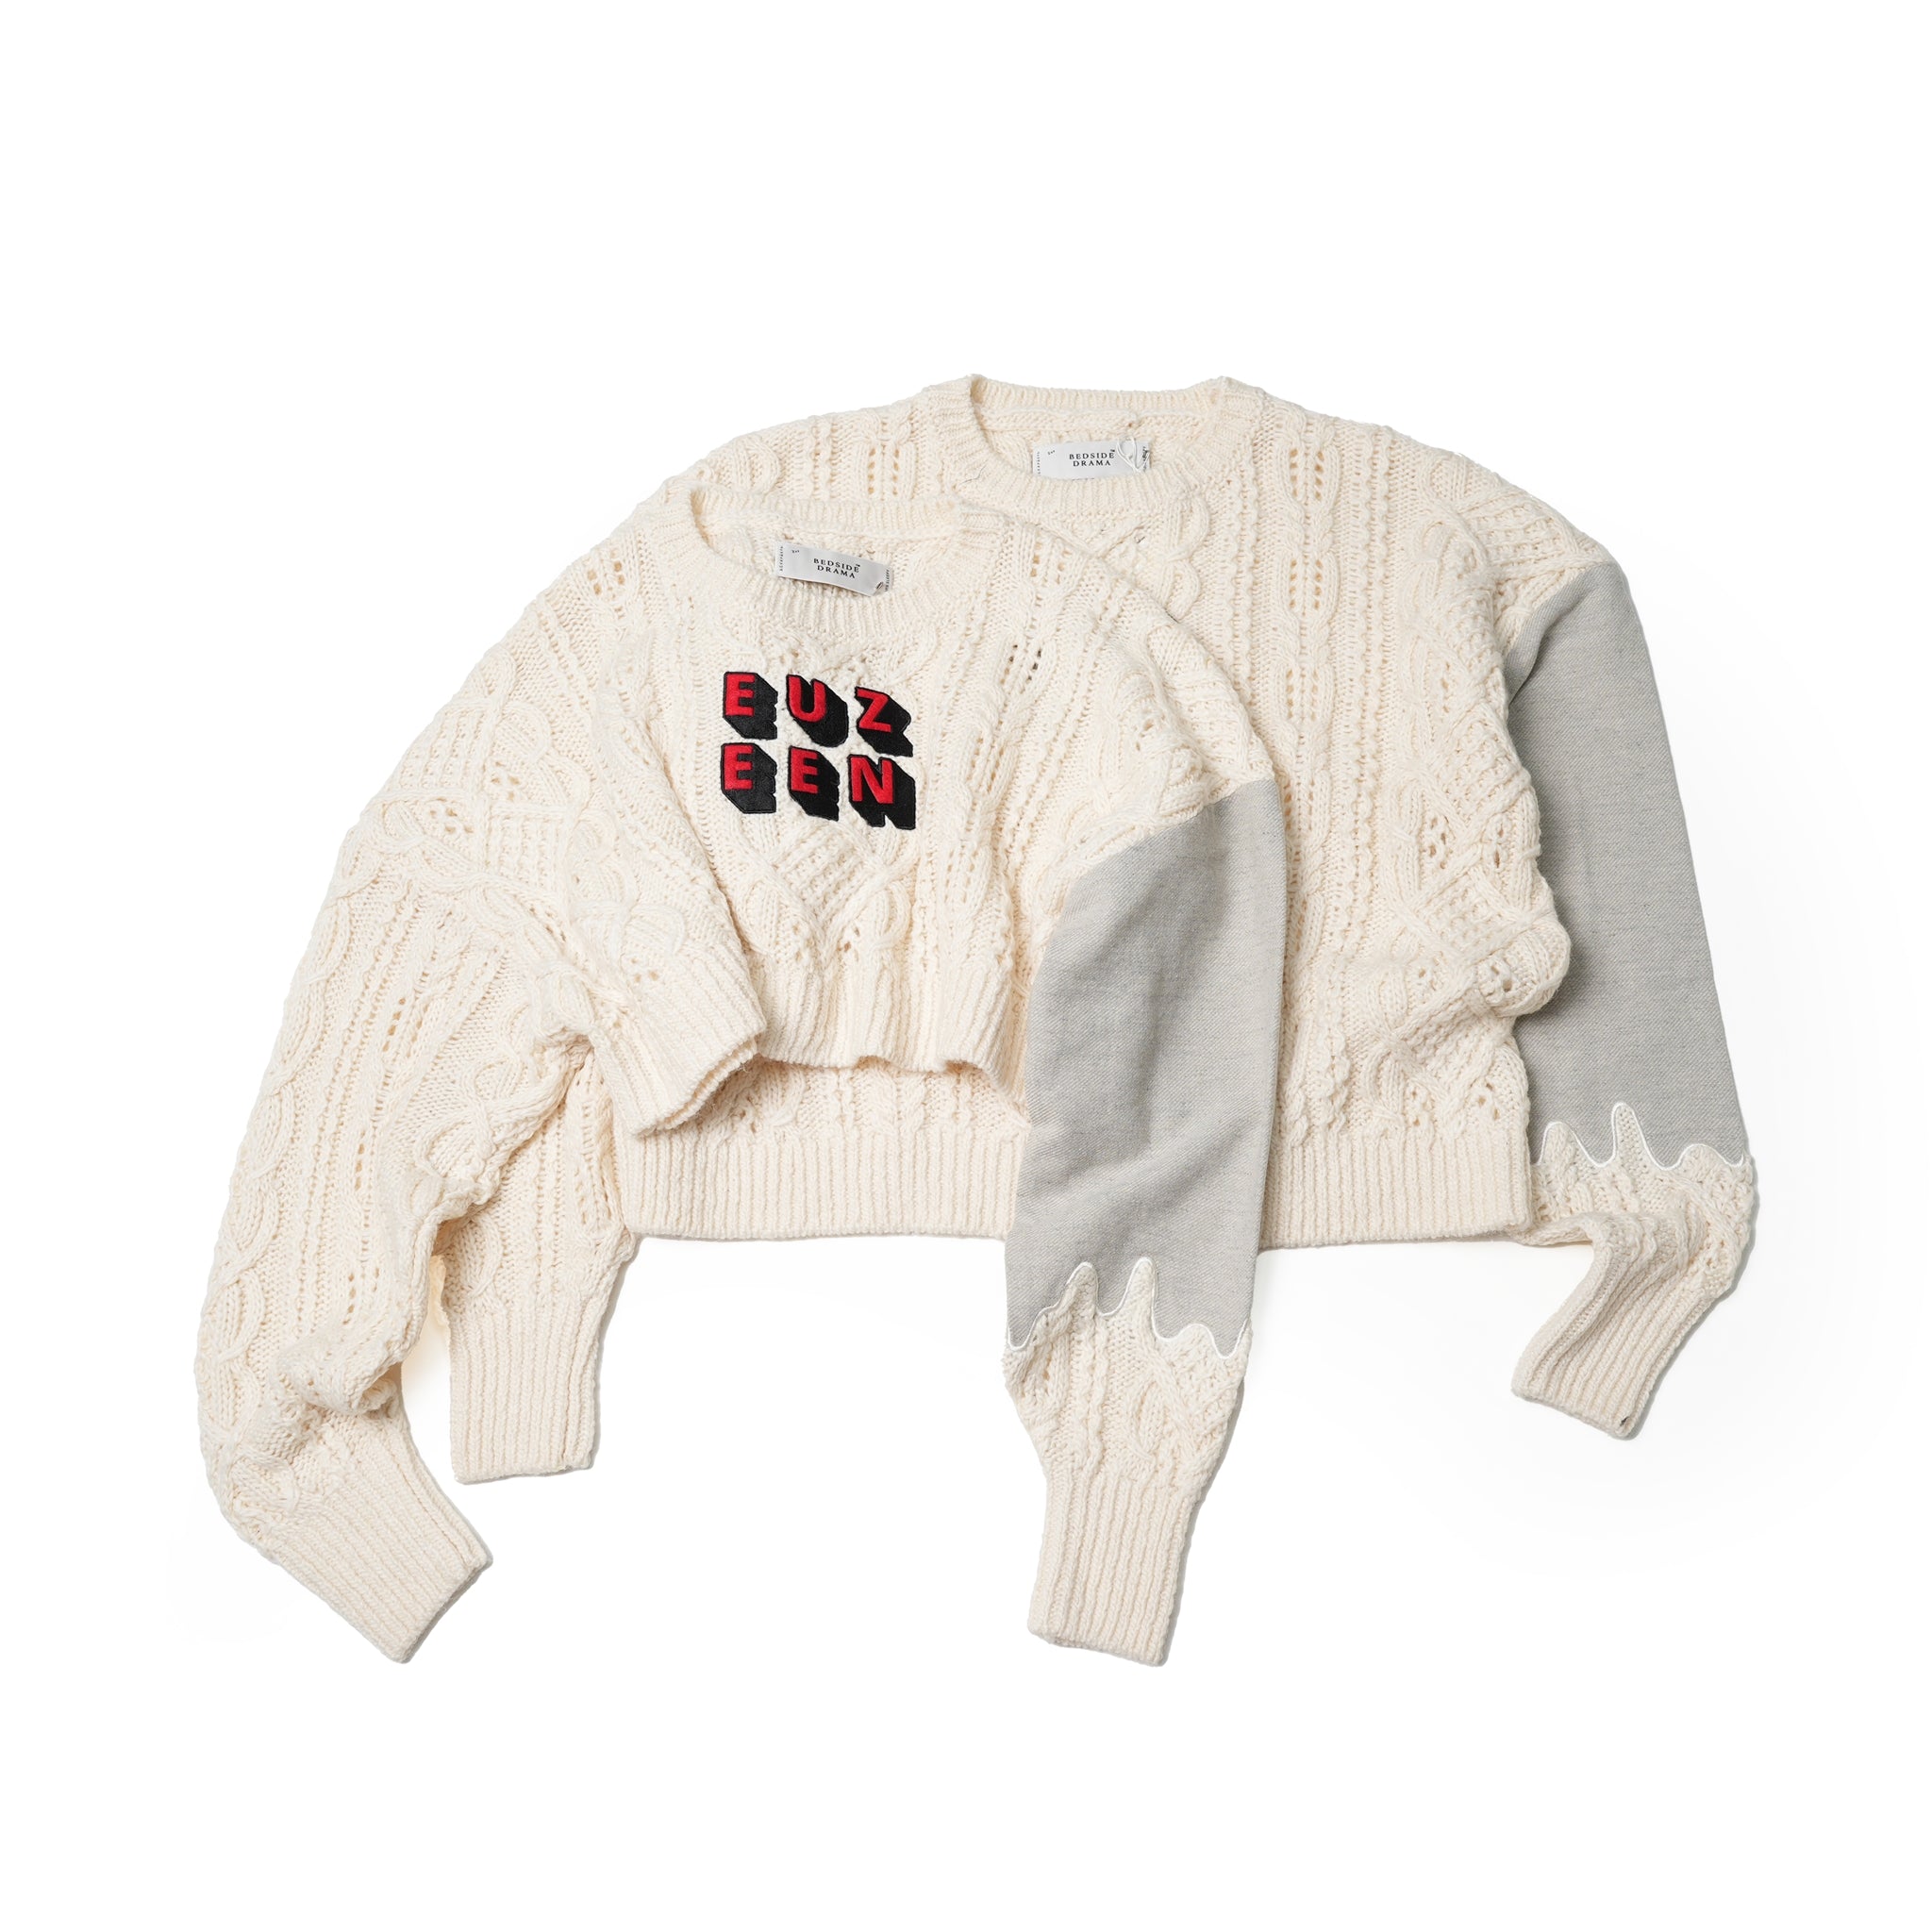 No:bsd23AW-16 | Name:EUZEEN Mix Knit Sweater | Color:Off White【BEDSIDEDRAMA_ベッドサイドドラマ】